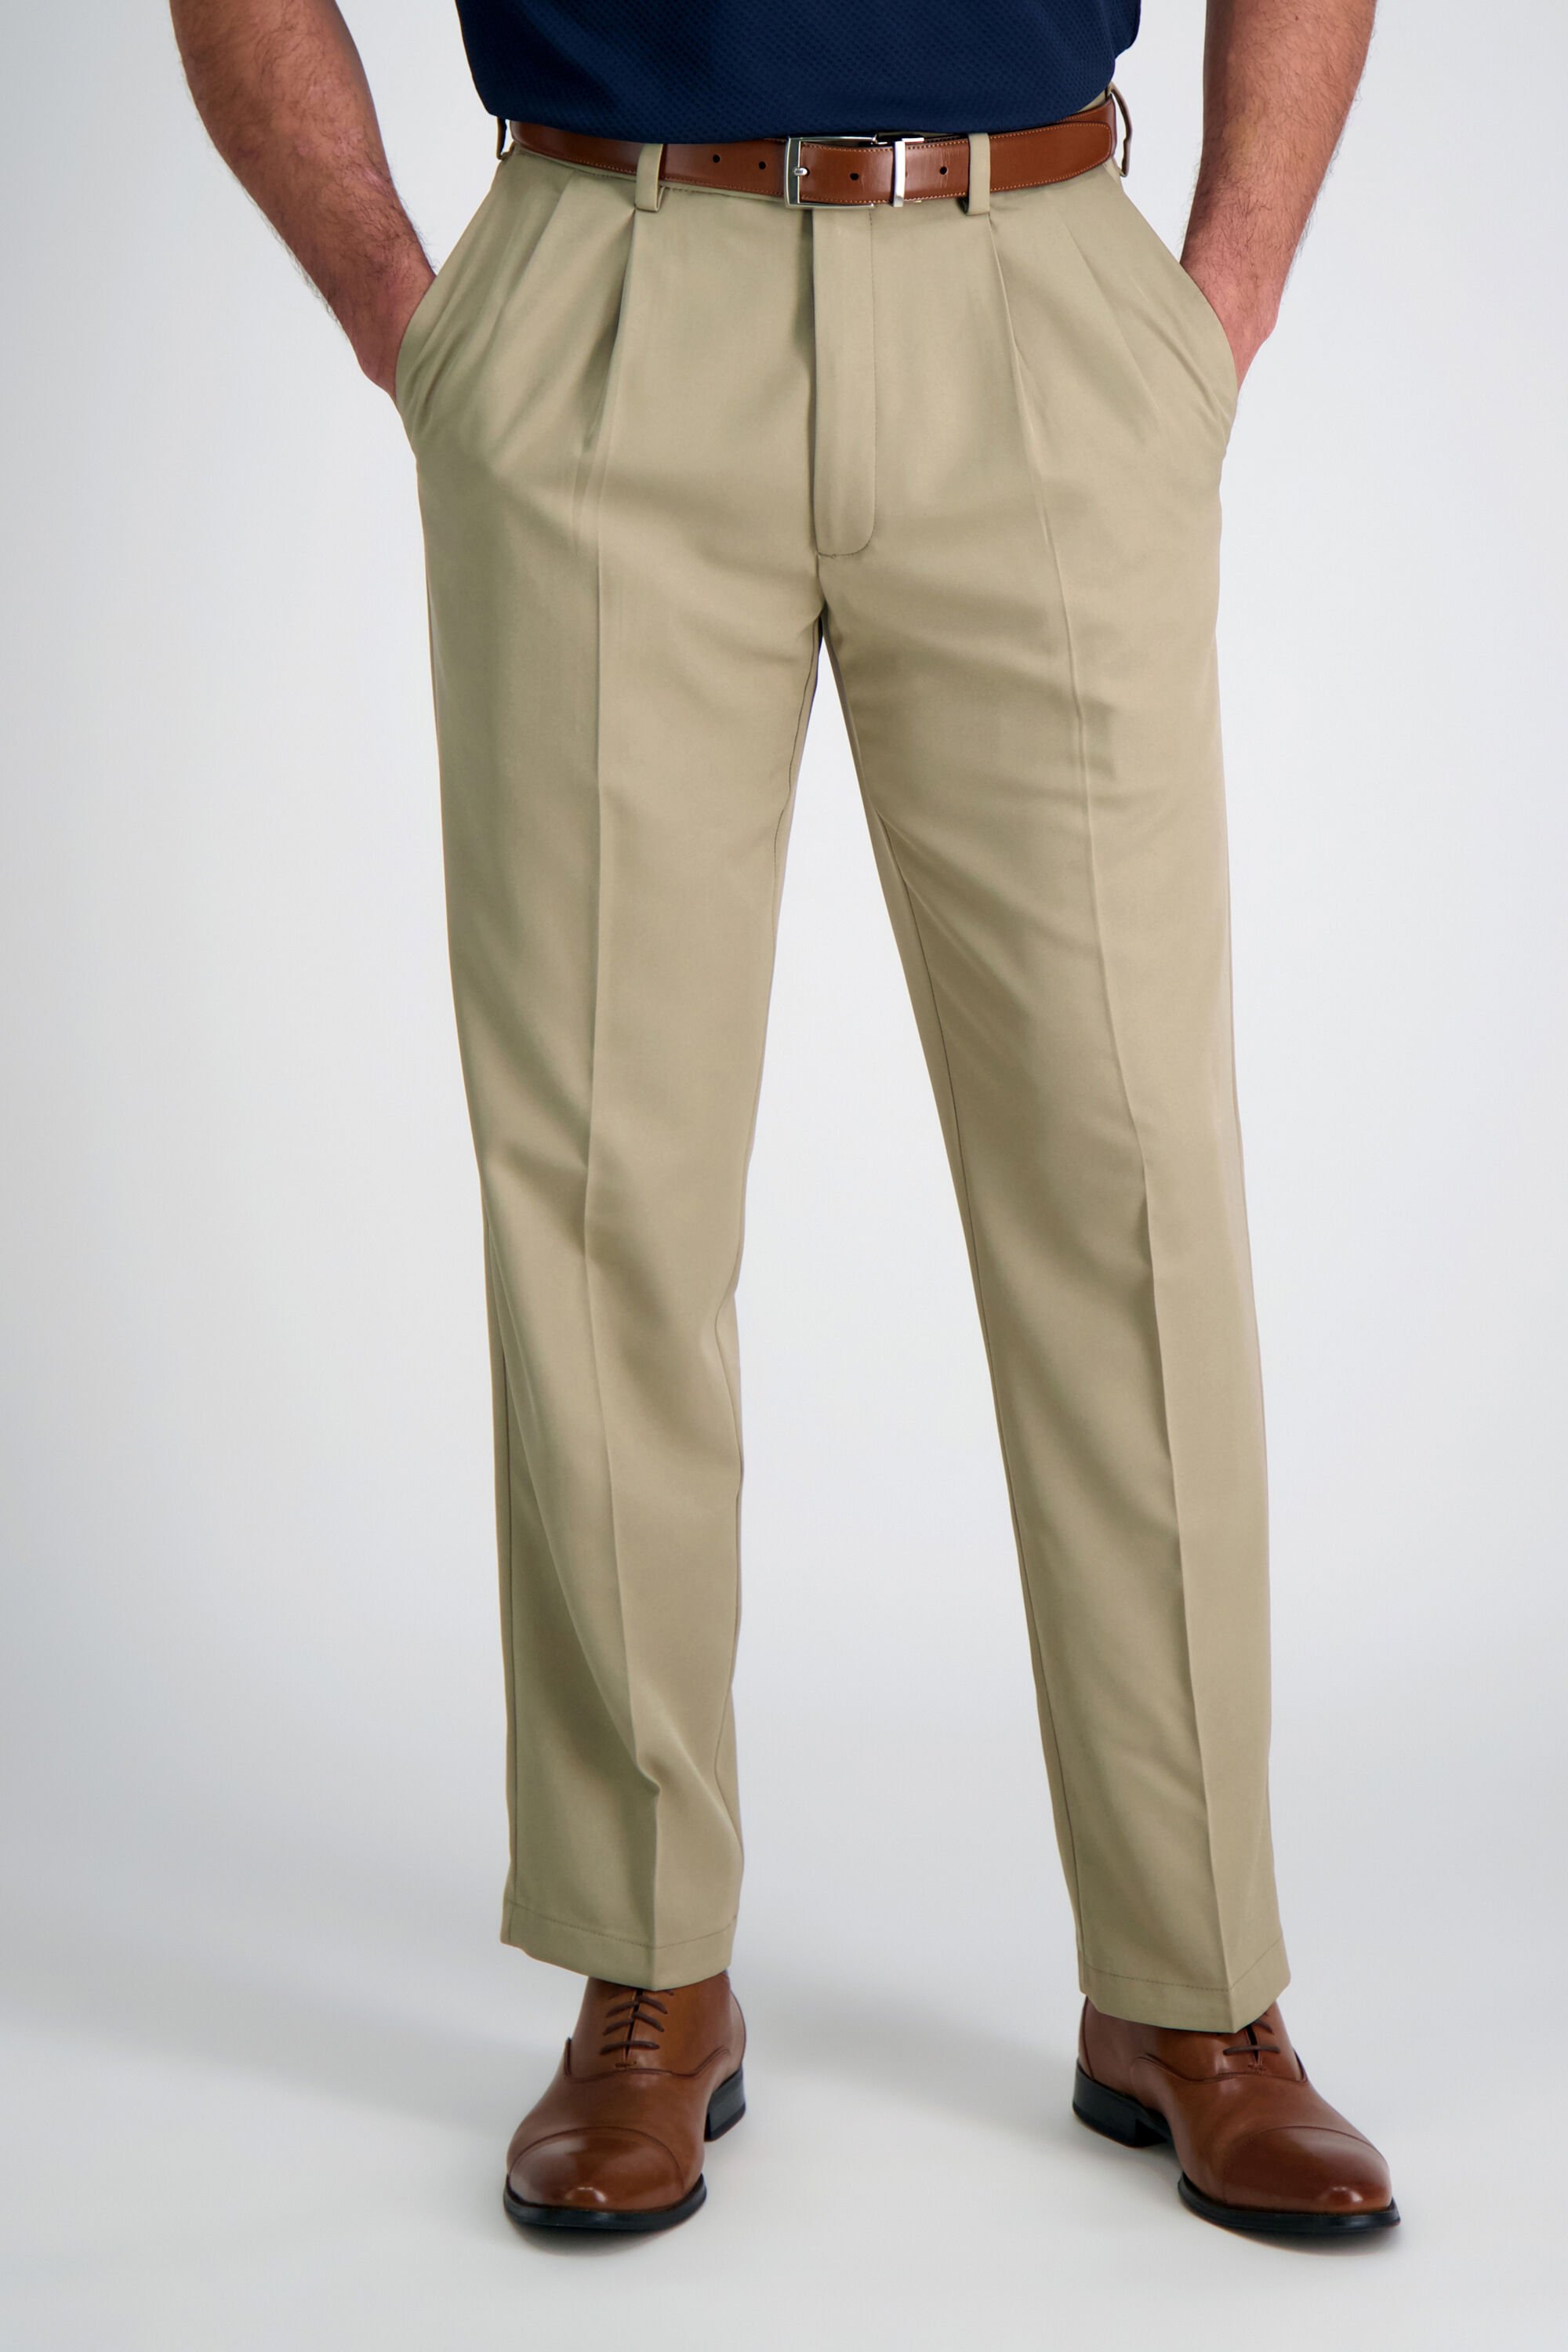 Cool 18 Pro Pant| Classic Fit, Pleat Front, Stretch, No Iron | Haggar.com